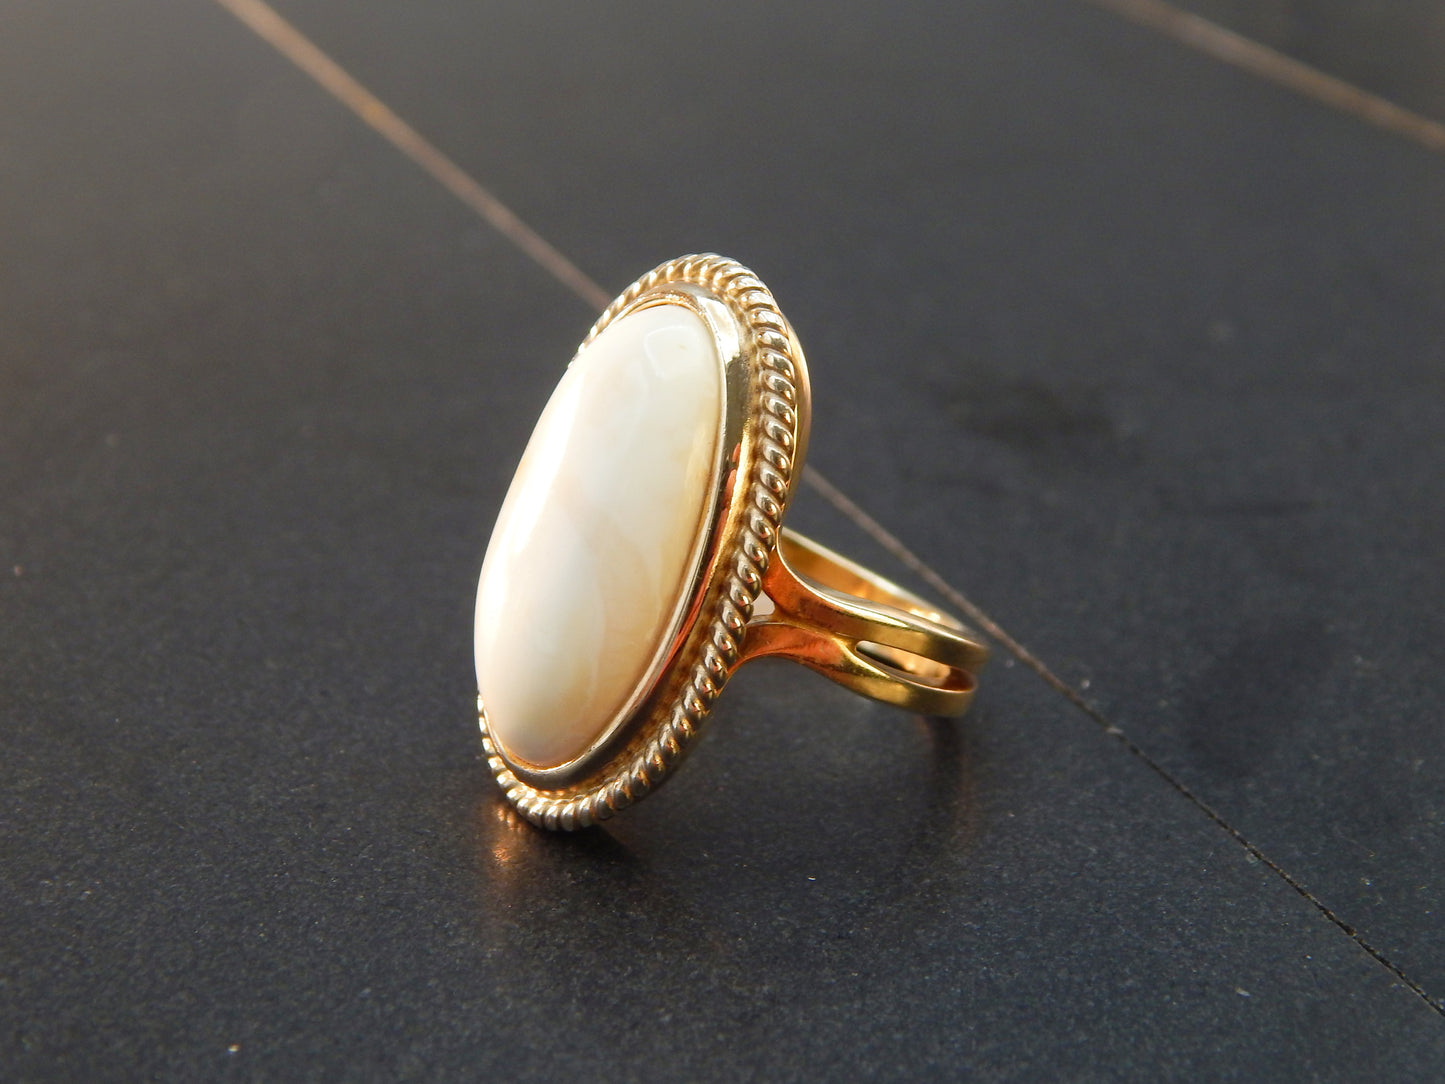 Natural Baltic Rare White Amber Victorian Ring in 14k Gold Plated s925